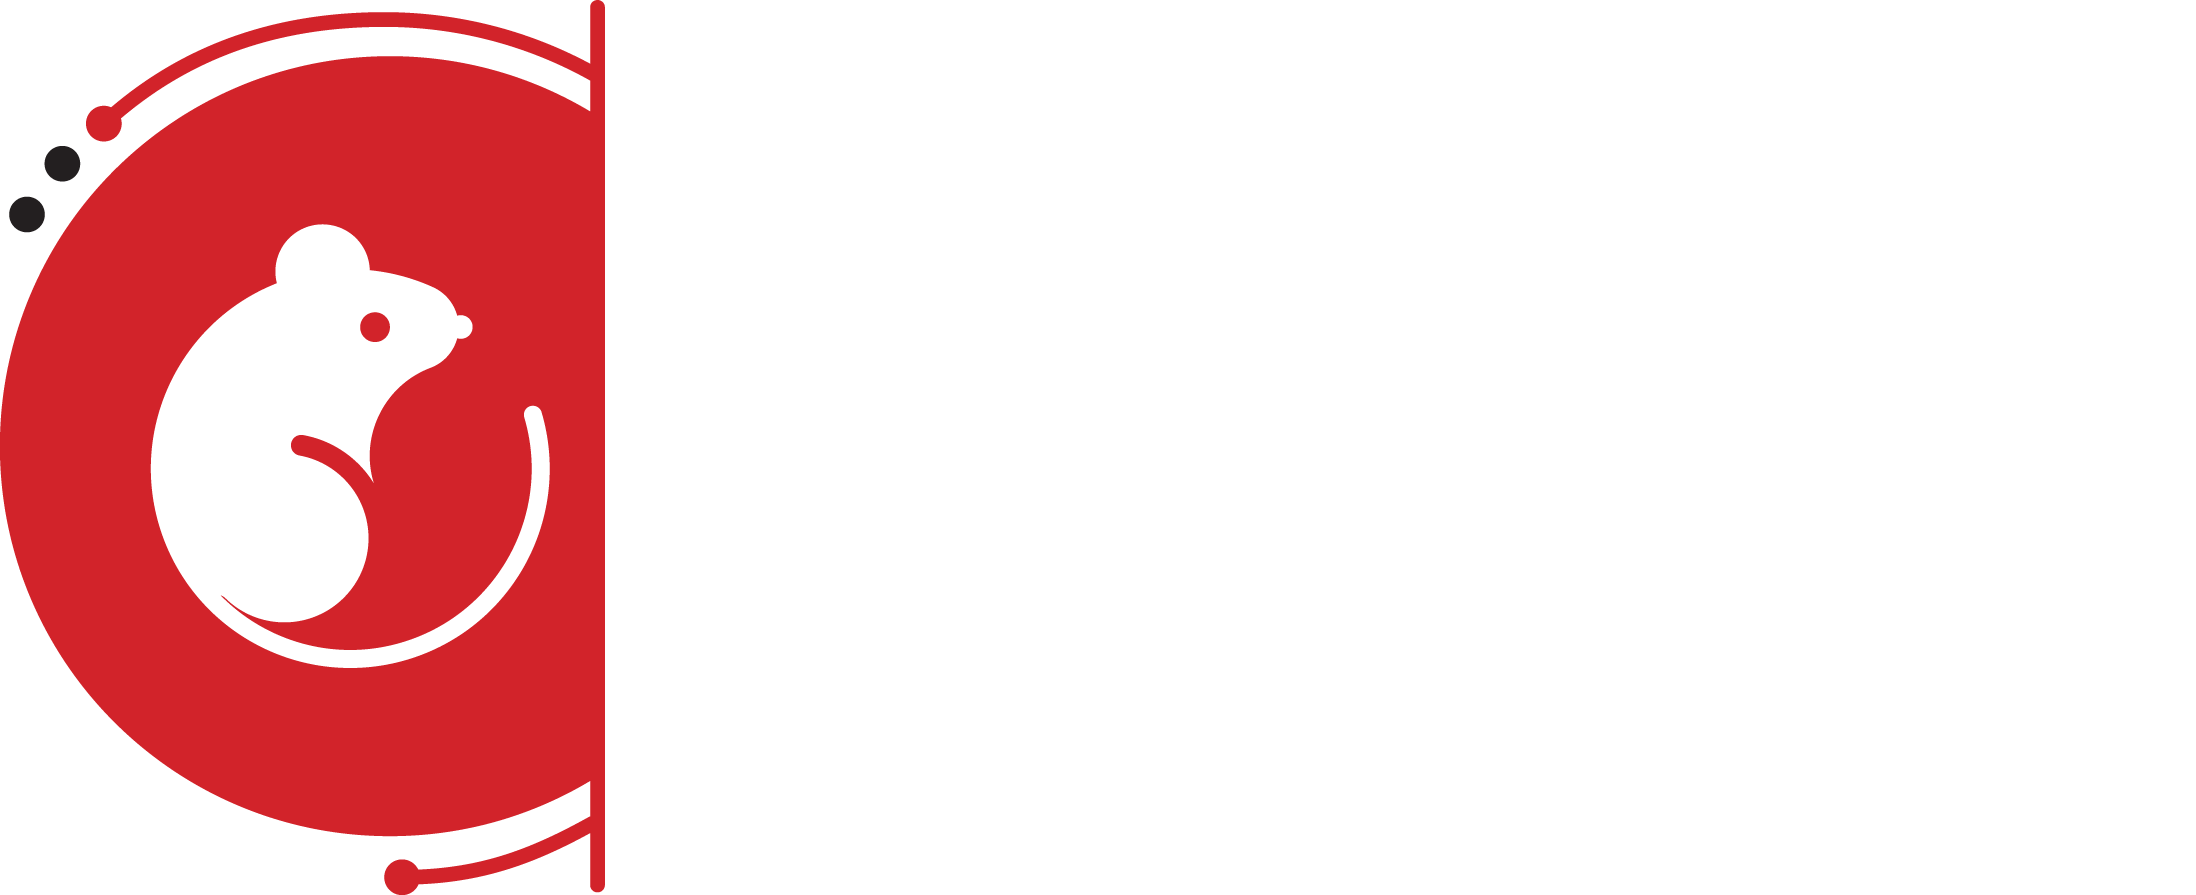 Rodent Control Virtual Conference